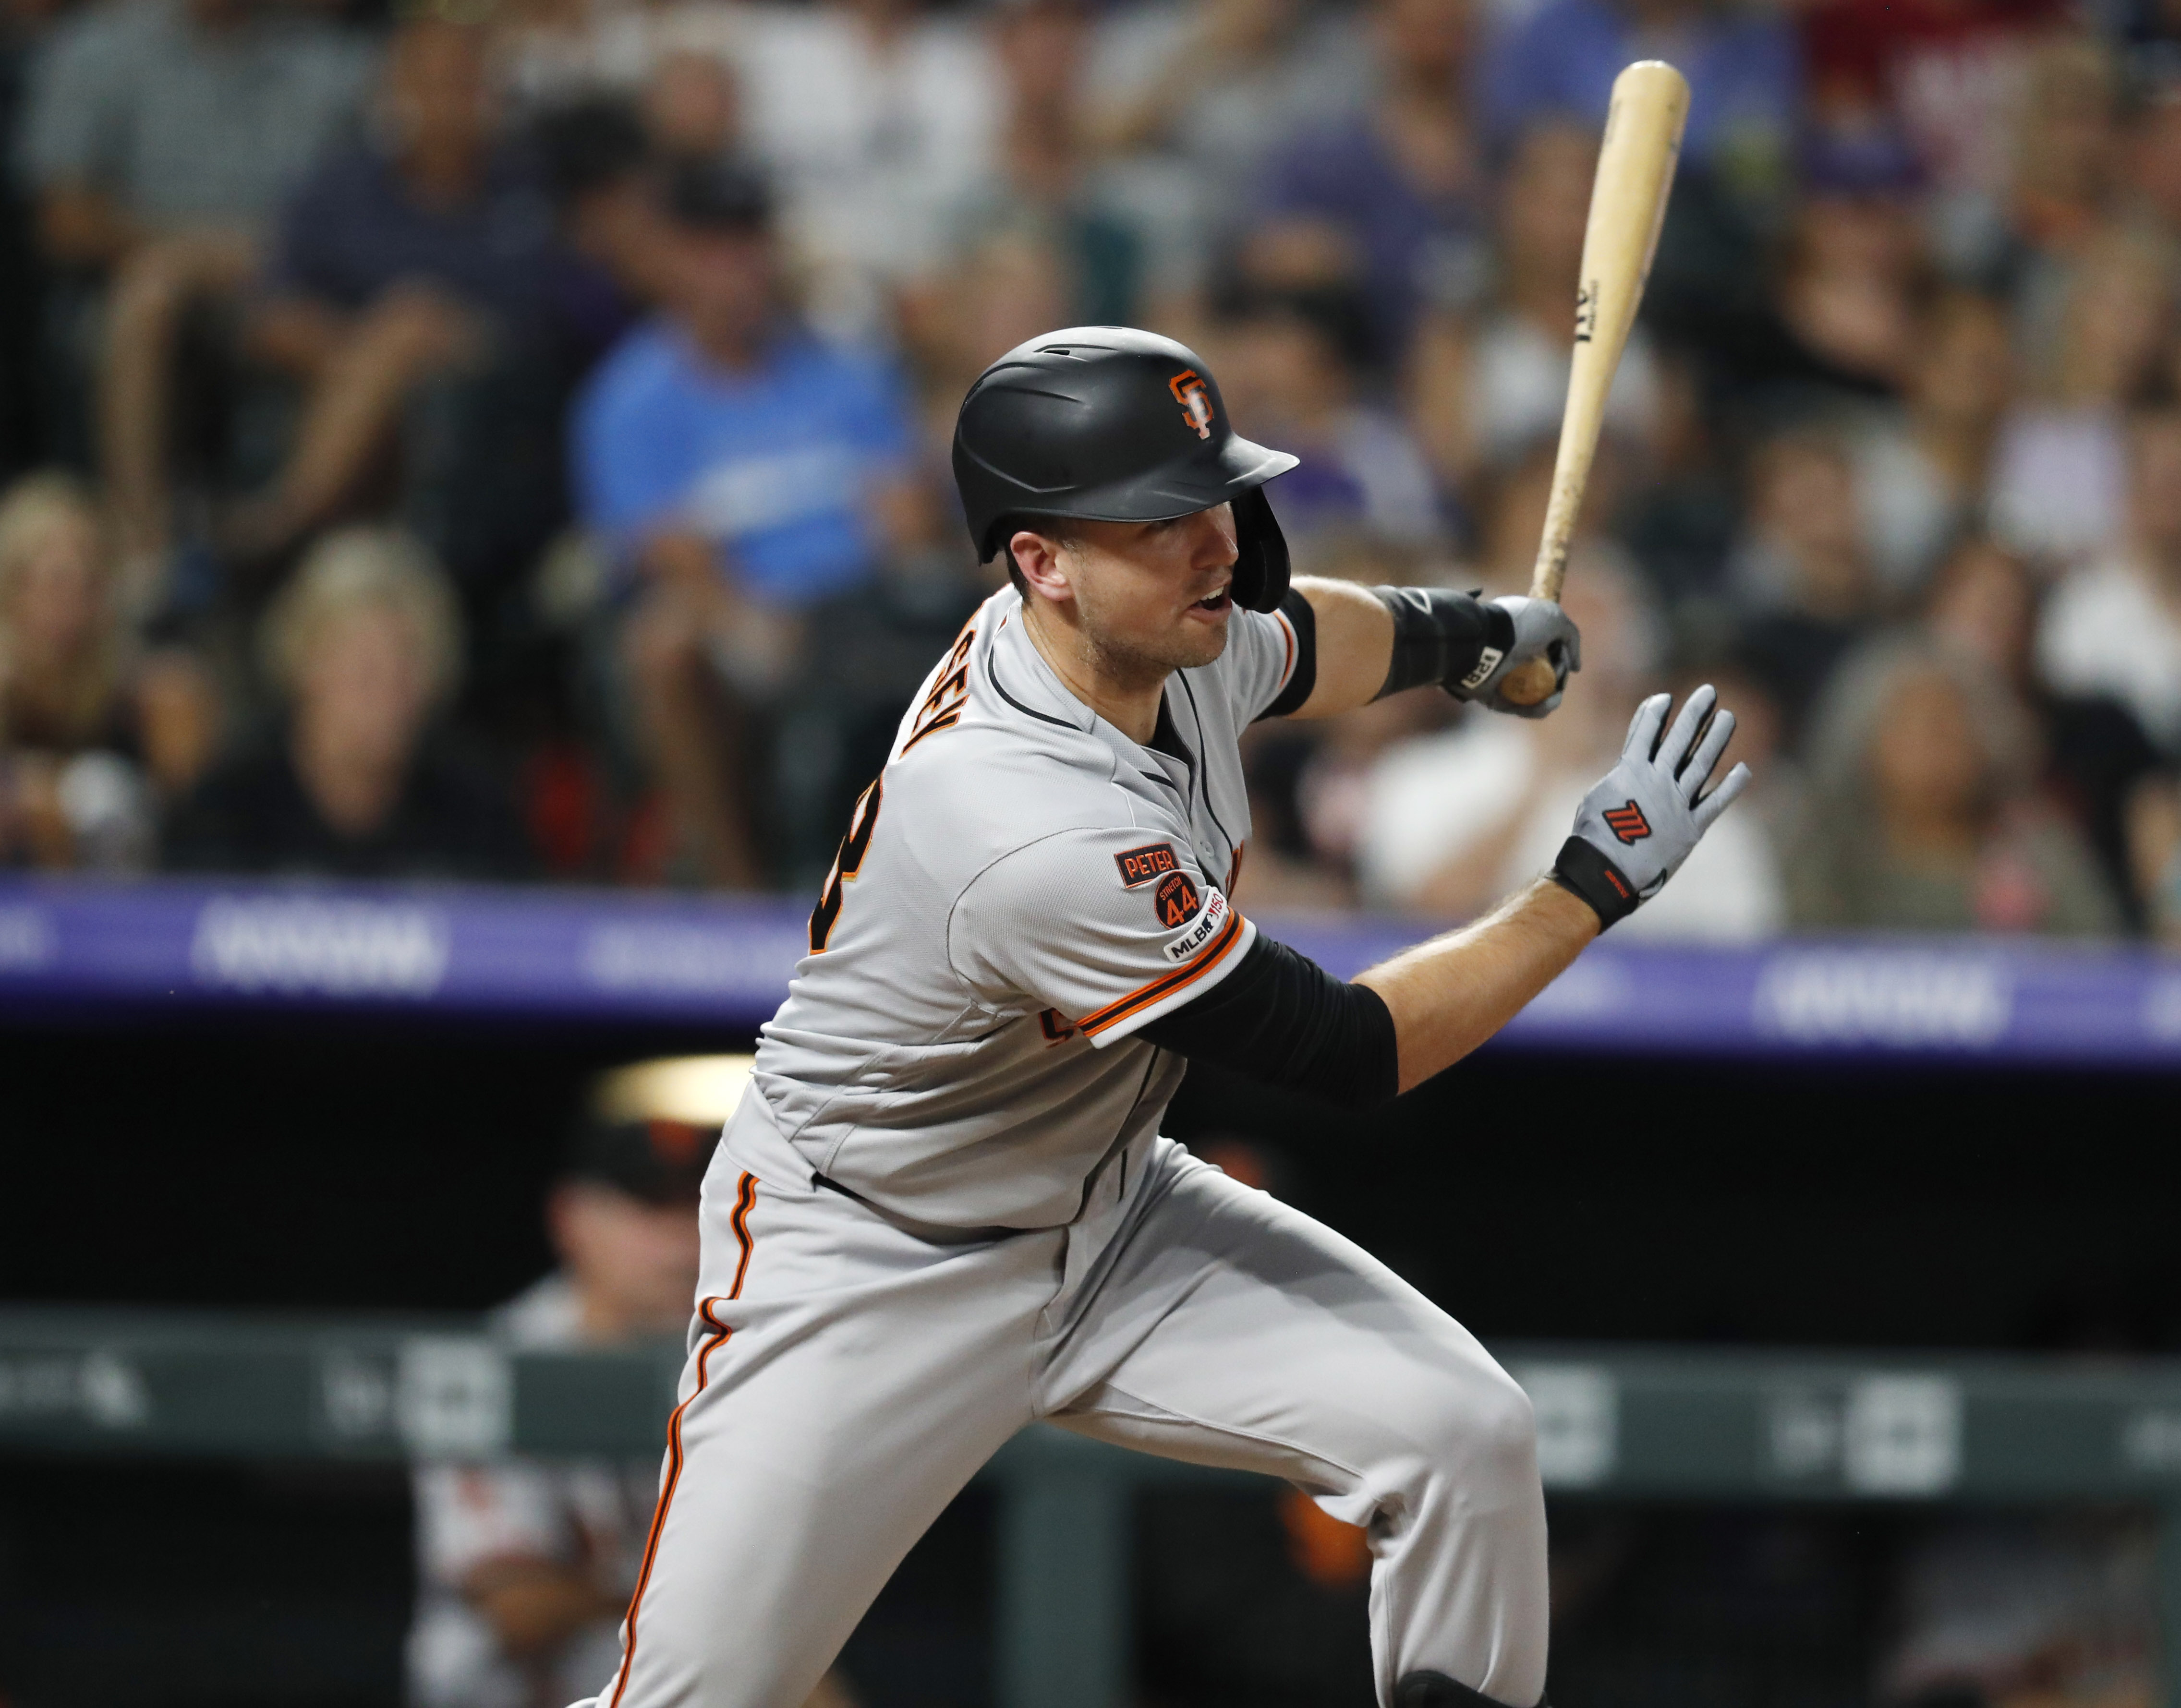 Posey's pinch-hit double lifts Giants over Rockies, 6-5